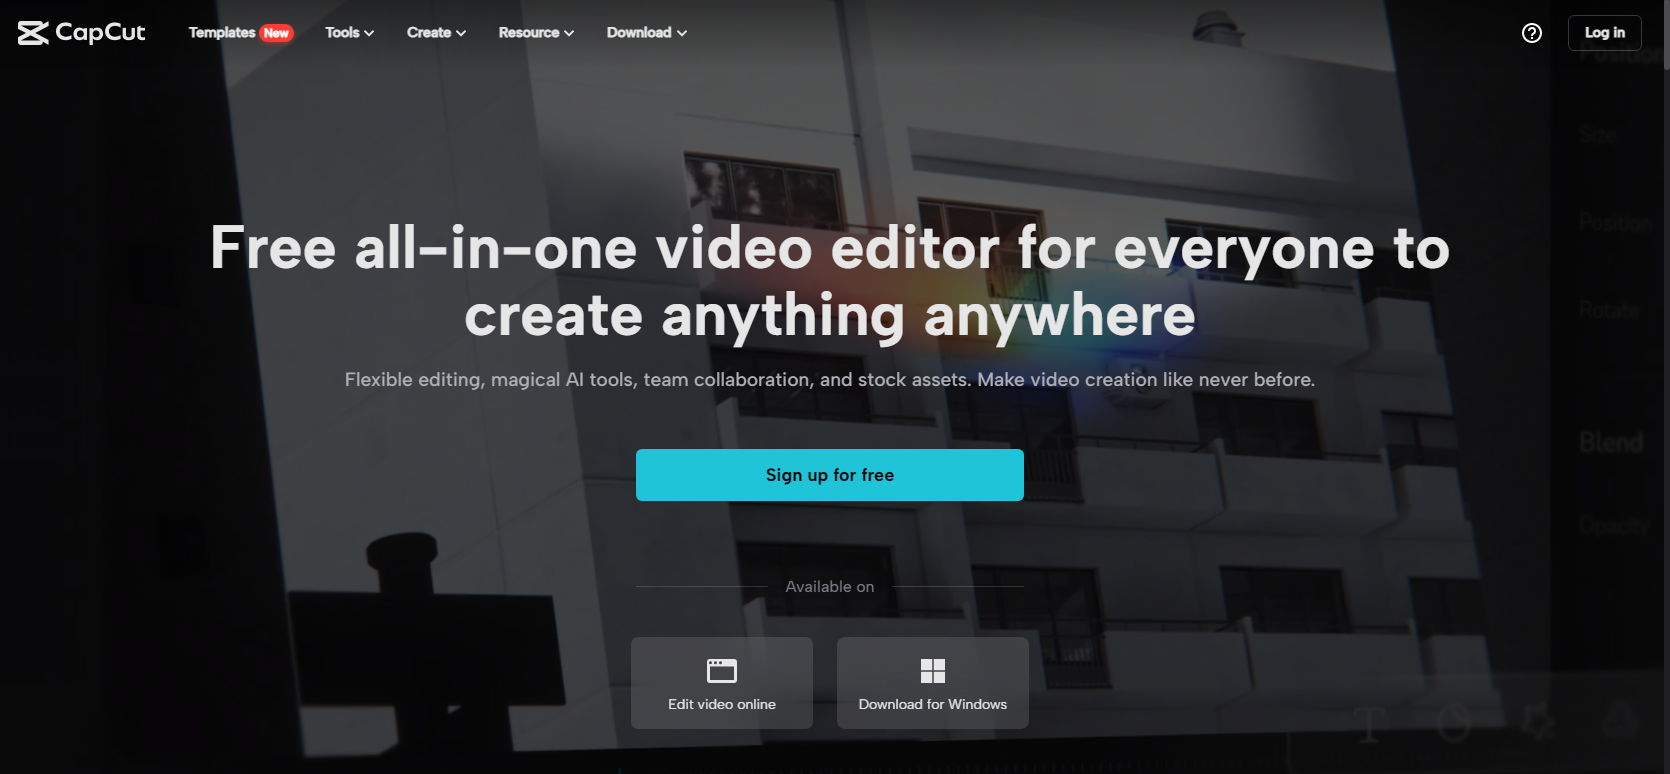 How to edit videos for free